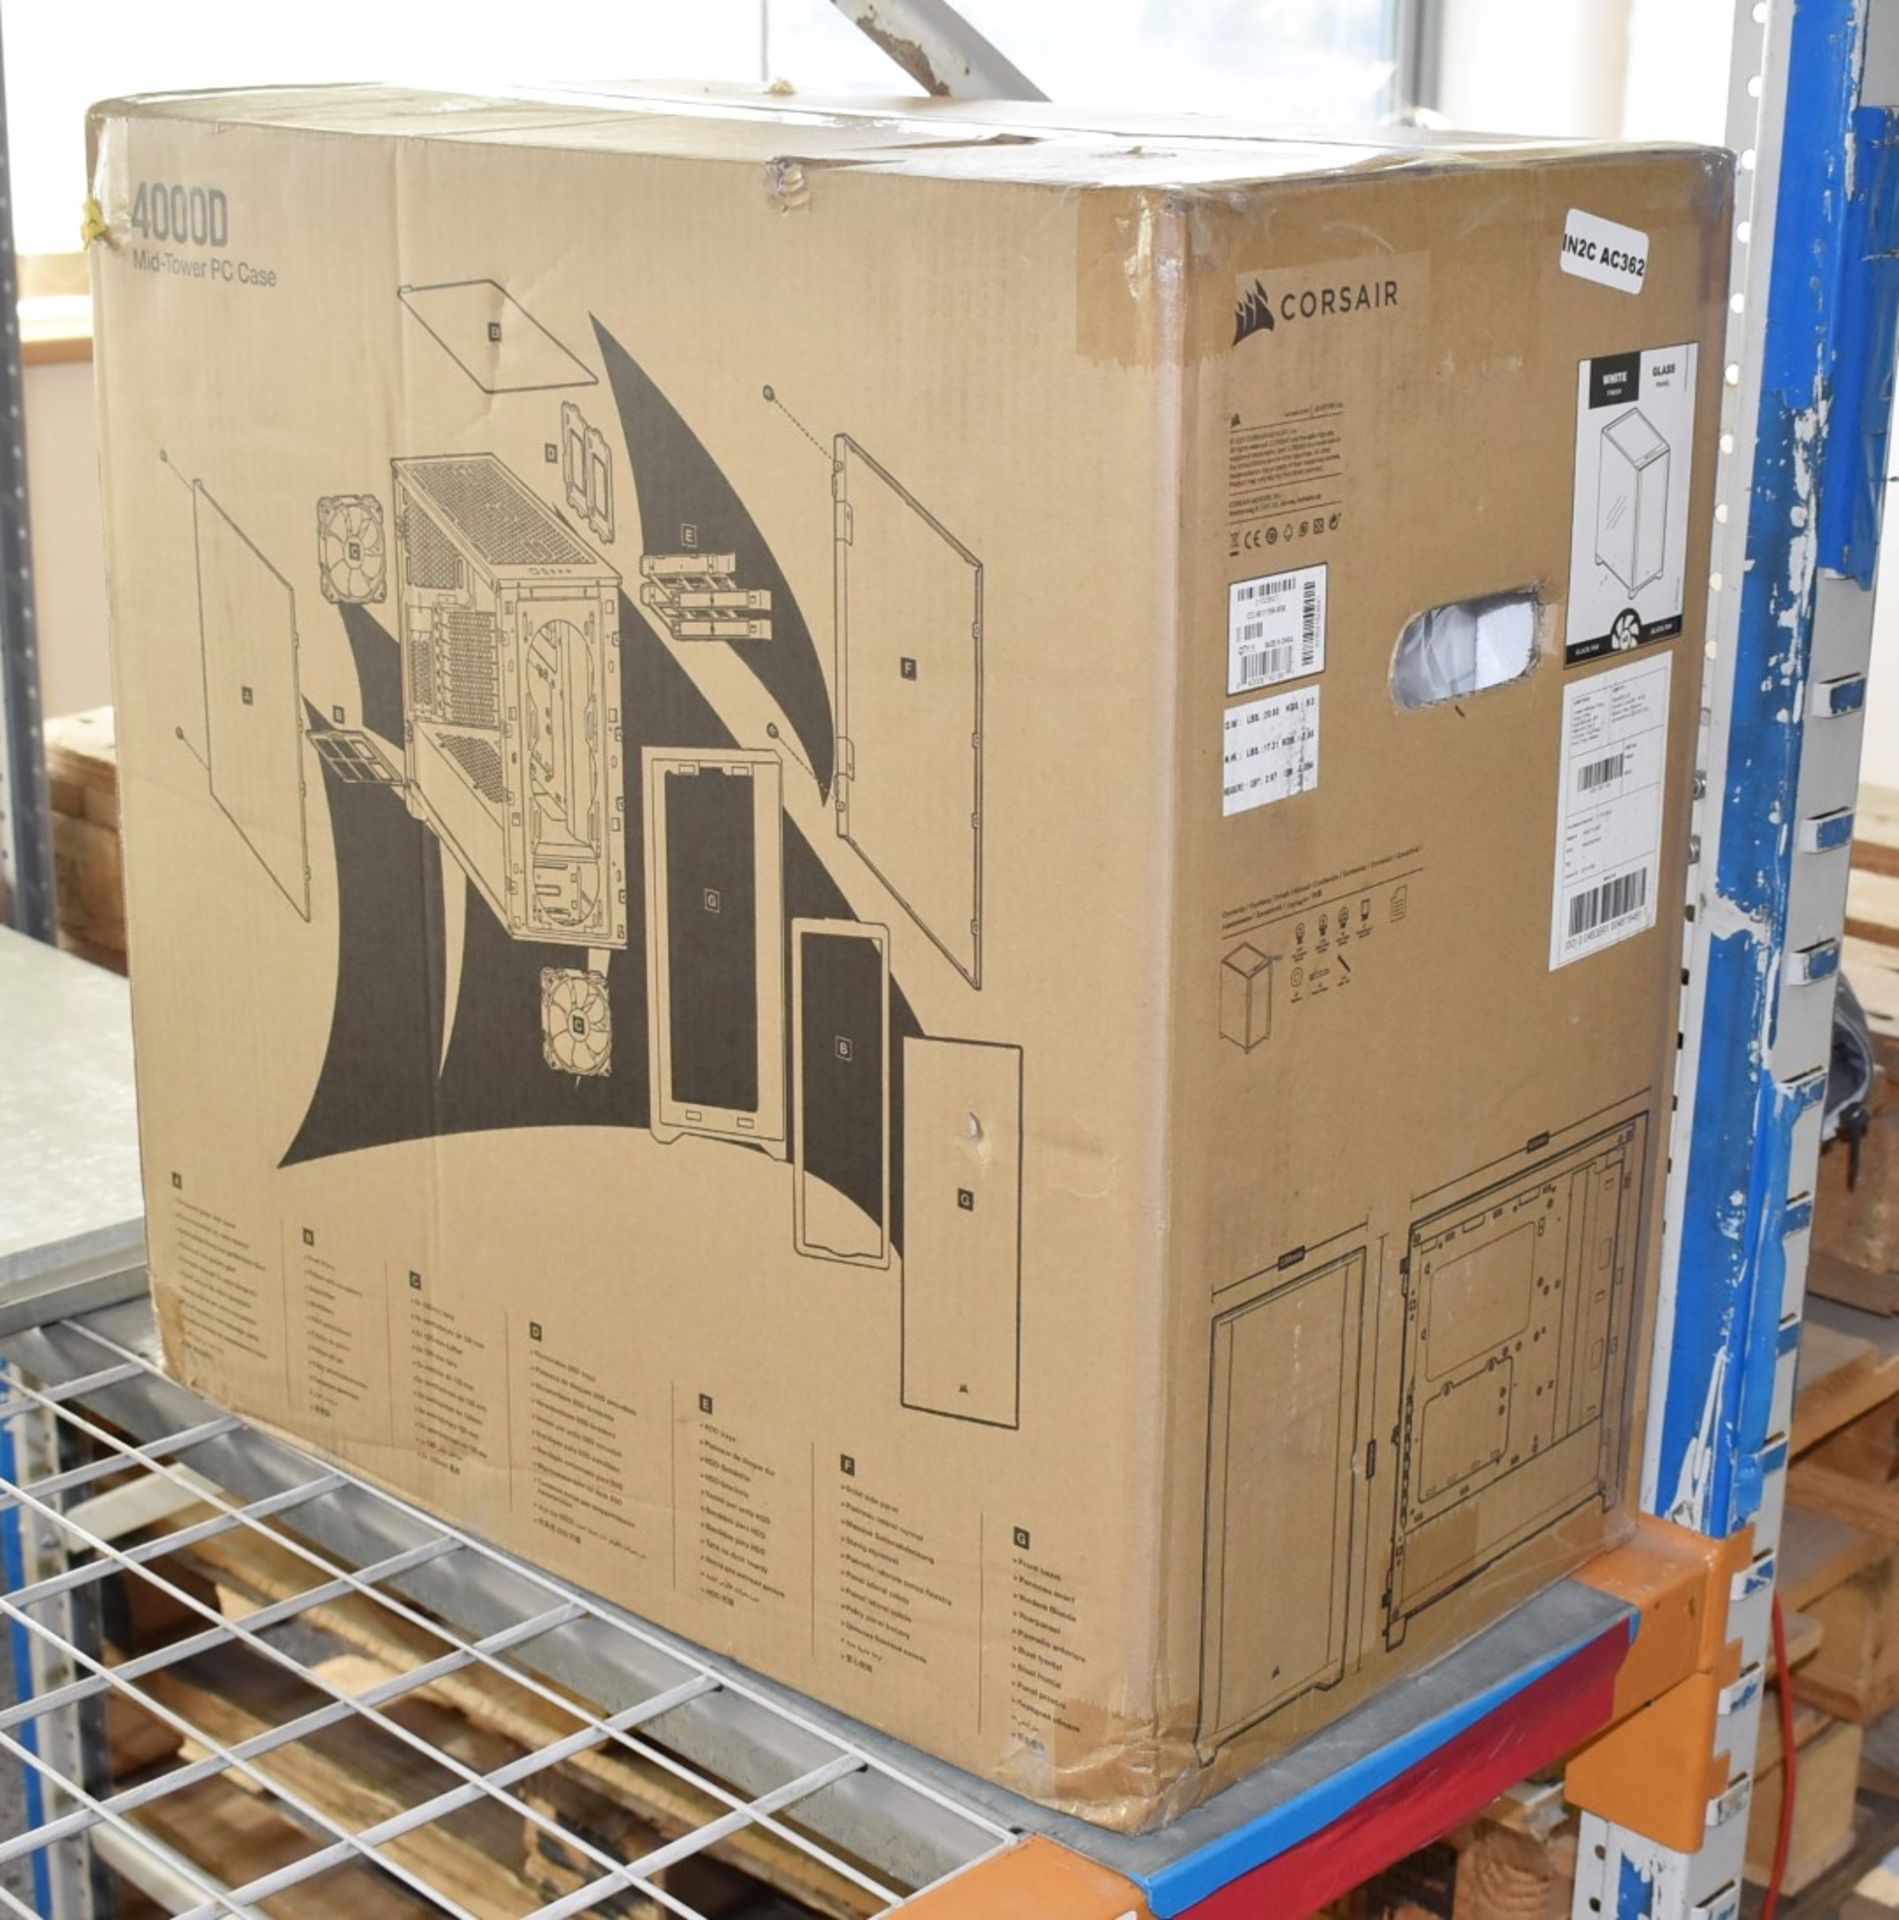 1 x Corsair 4000D Mid Tower PC Case With Tempered Glass Side Panel - New Boxed Stock - Image 4 of 5